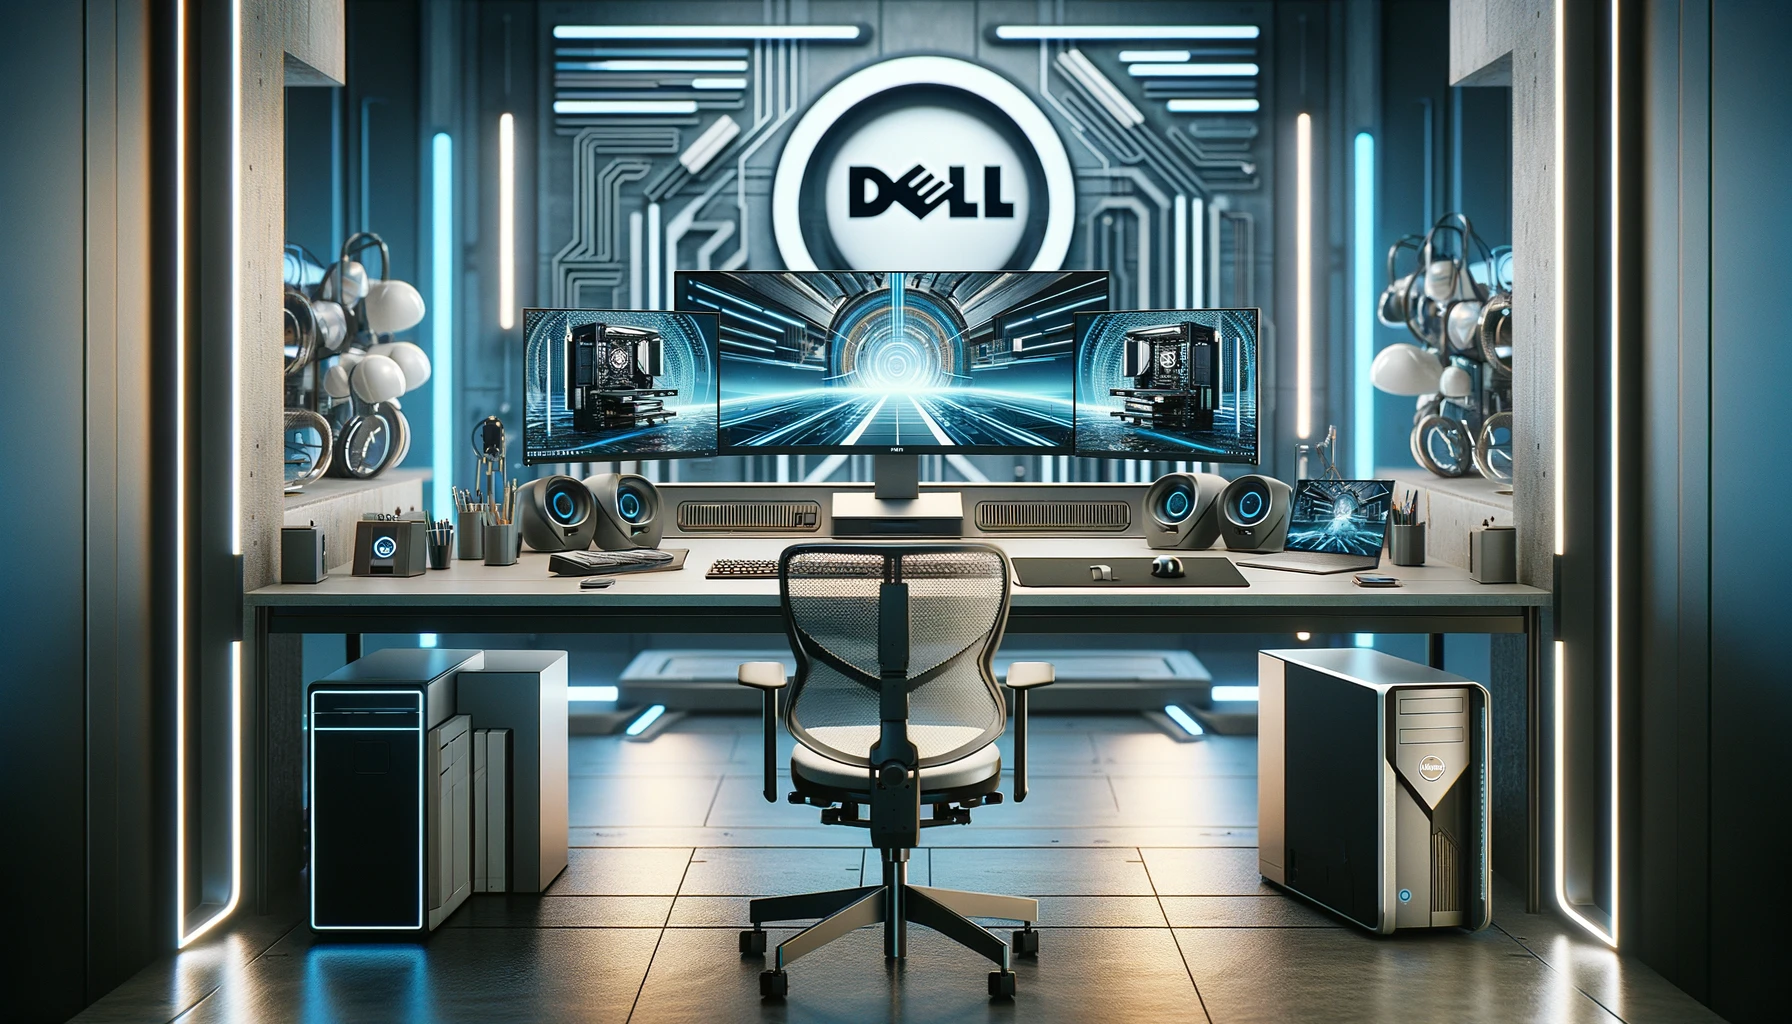 The image above illustrates a stock photo of an innovative tech workspace, featuring a high-performance Dell computer setup that includes dual monitors, an ergonomic keyboard, and a precision mouse, all designed to cater to professionals and gamers in a high-tech environment.